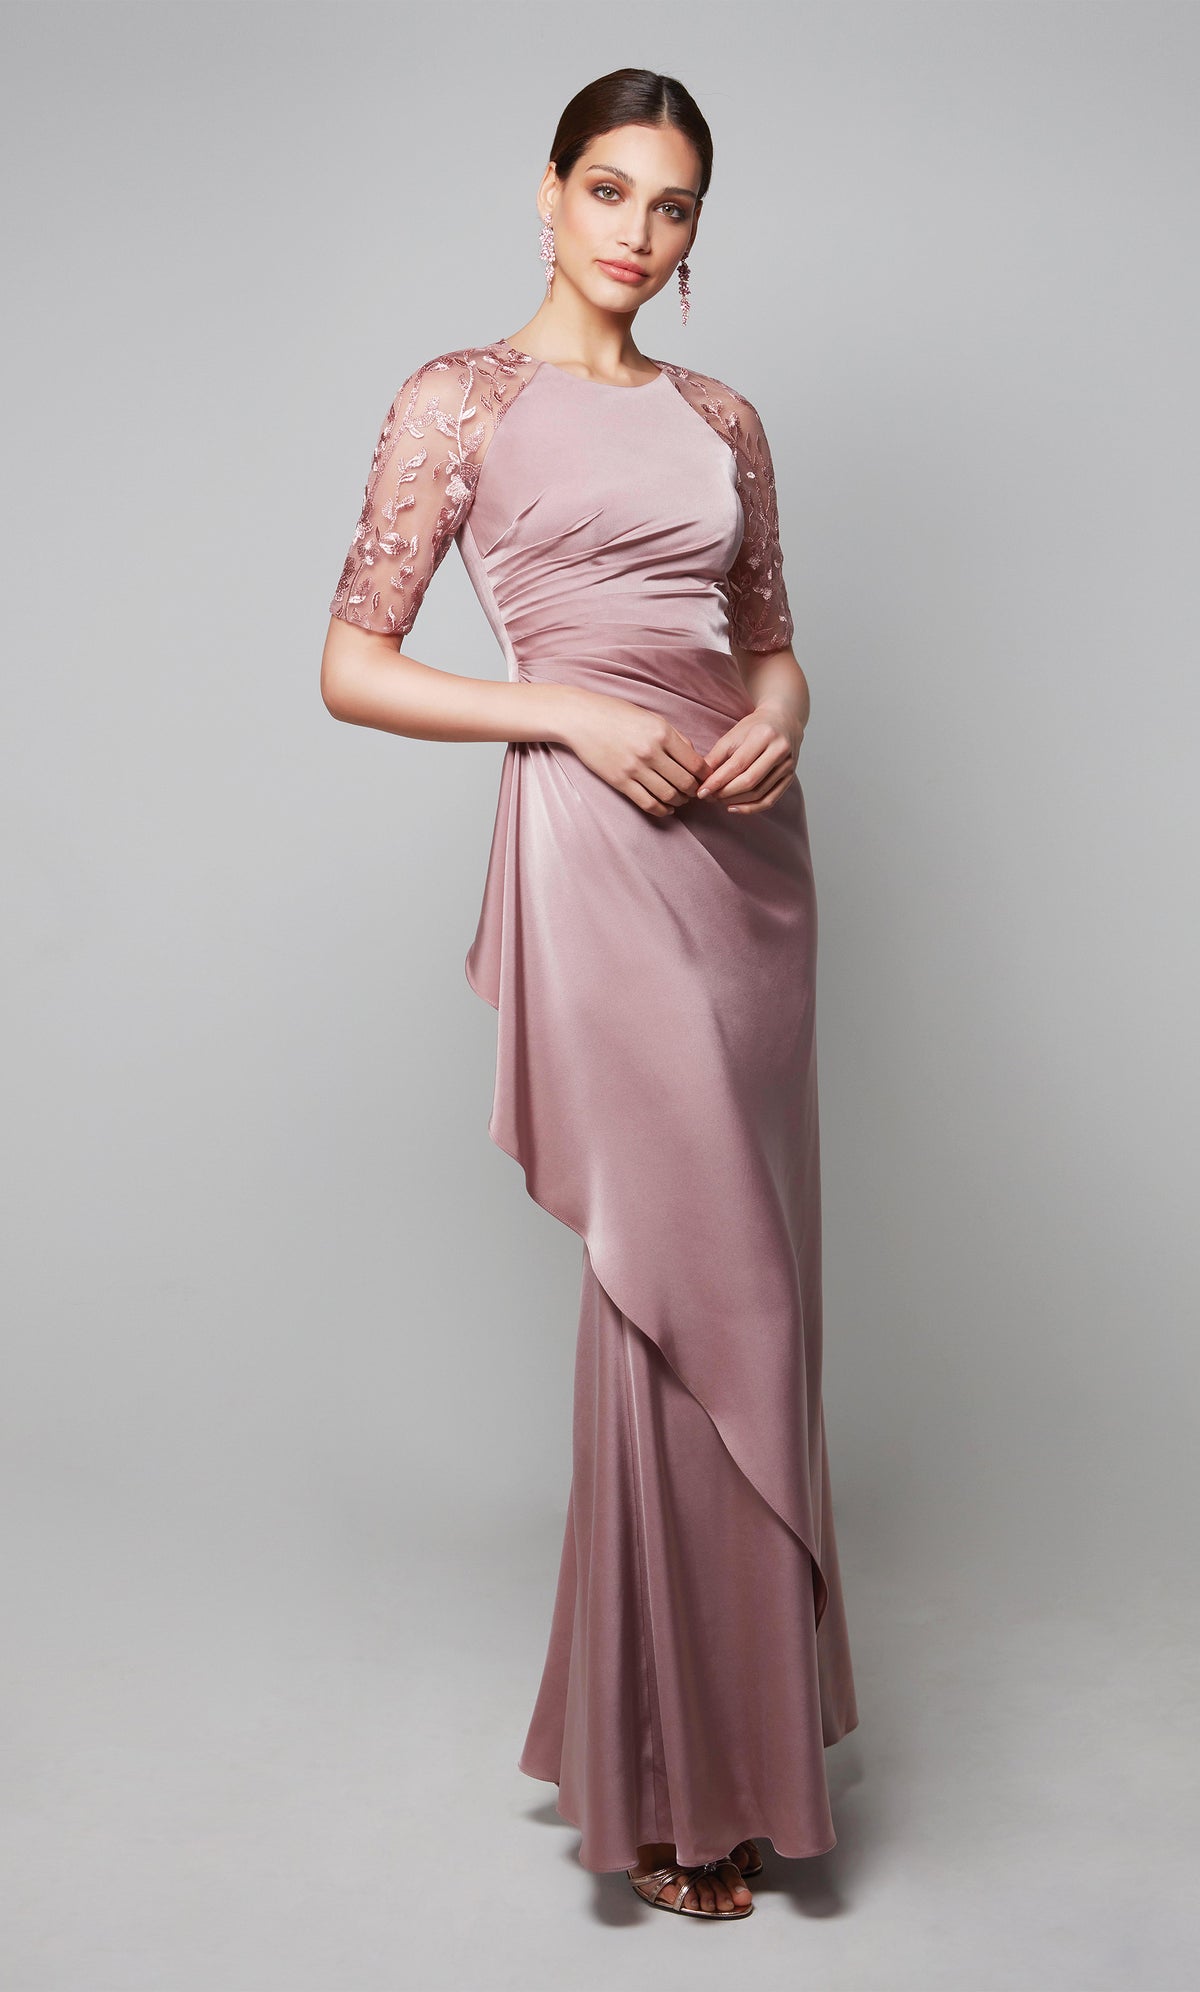 Long formal ruffle dress with a high neck and sheer lace sleeves in light pink.